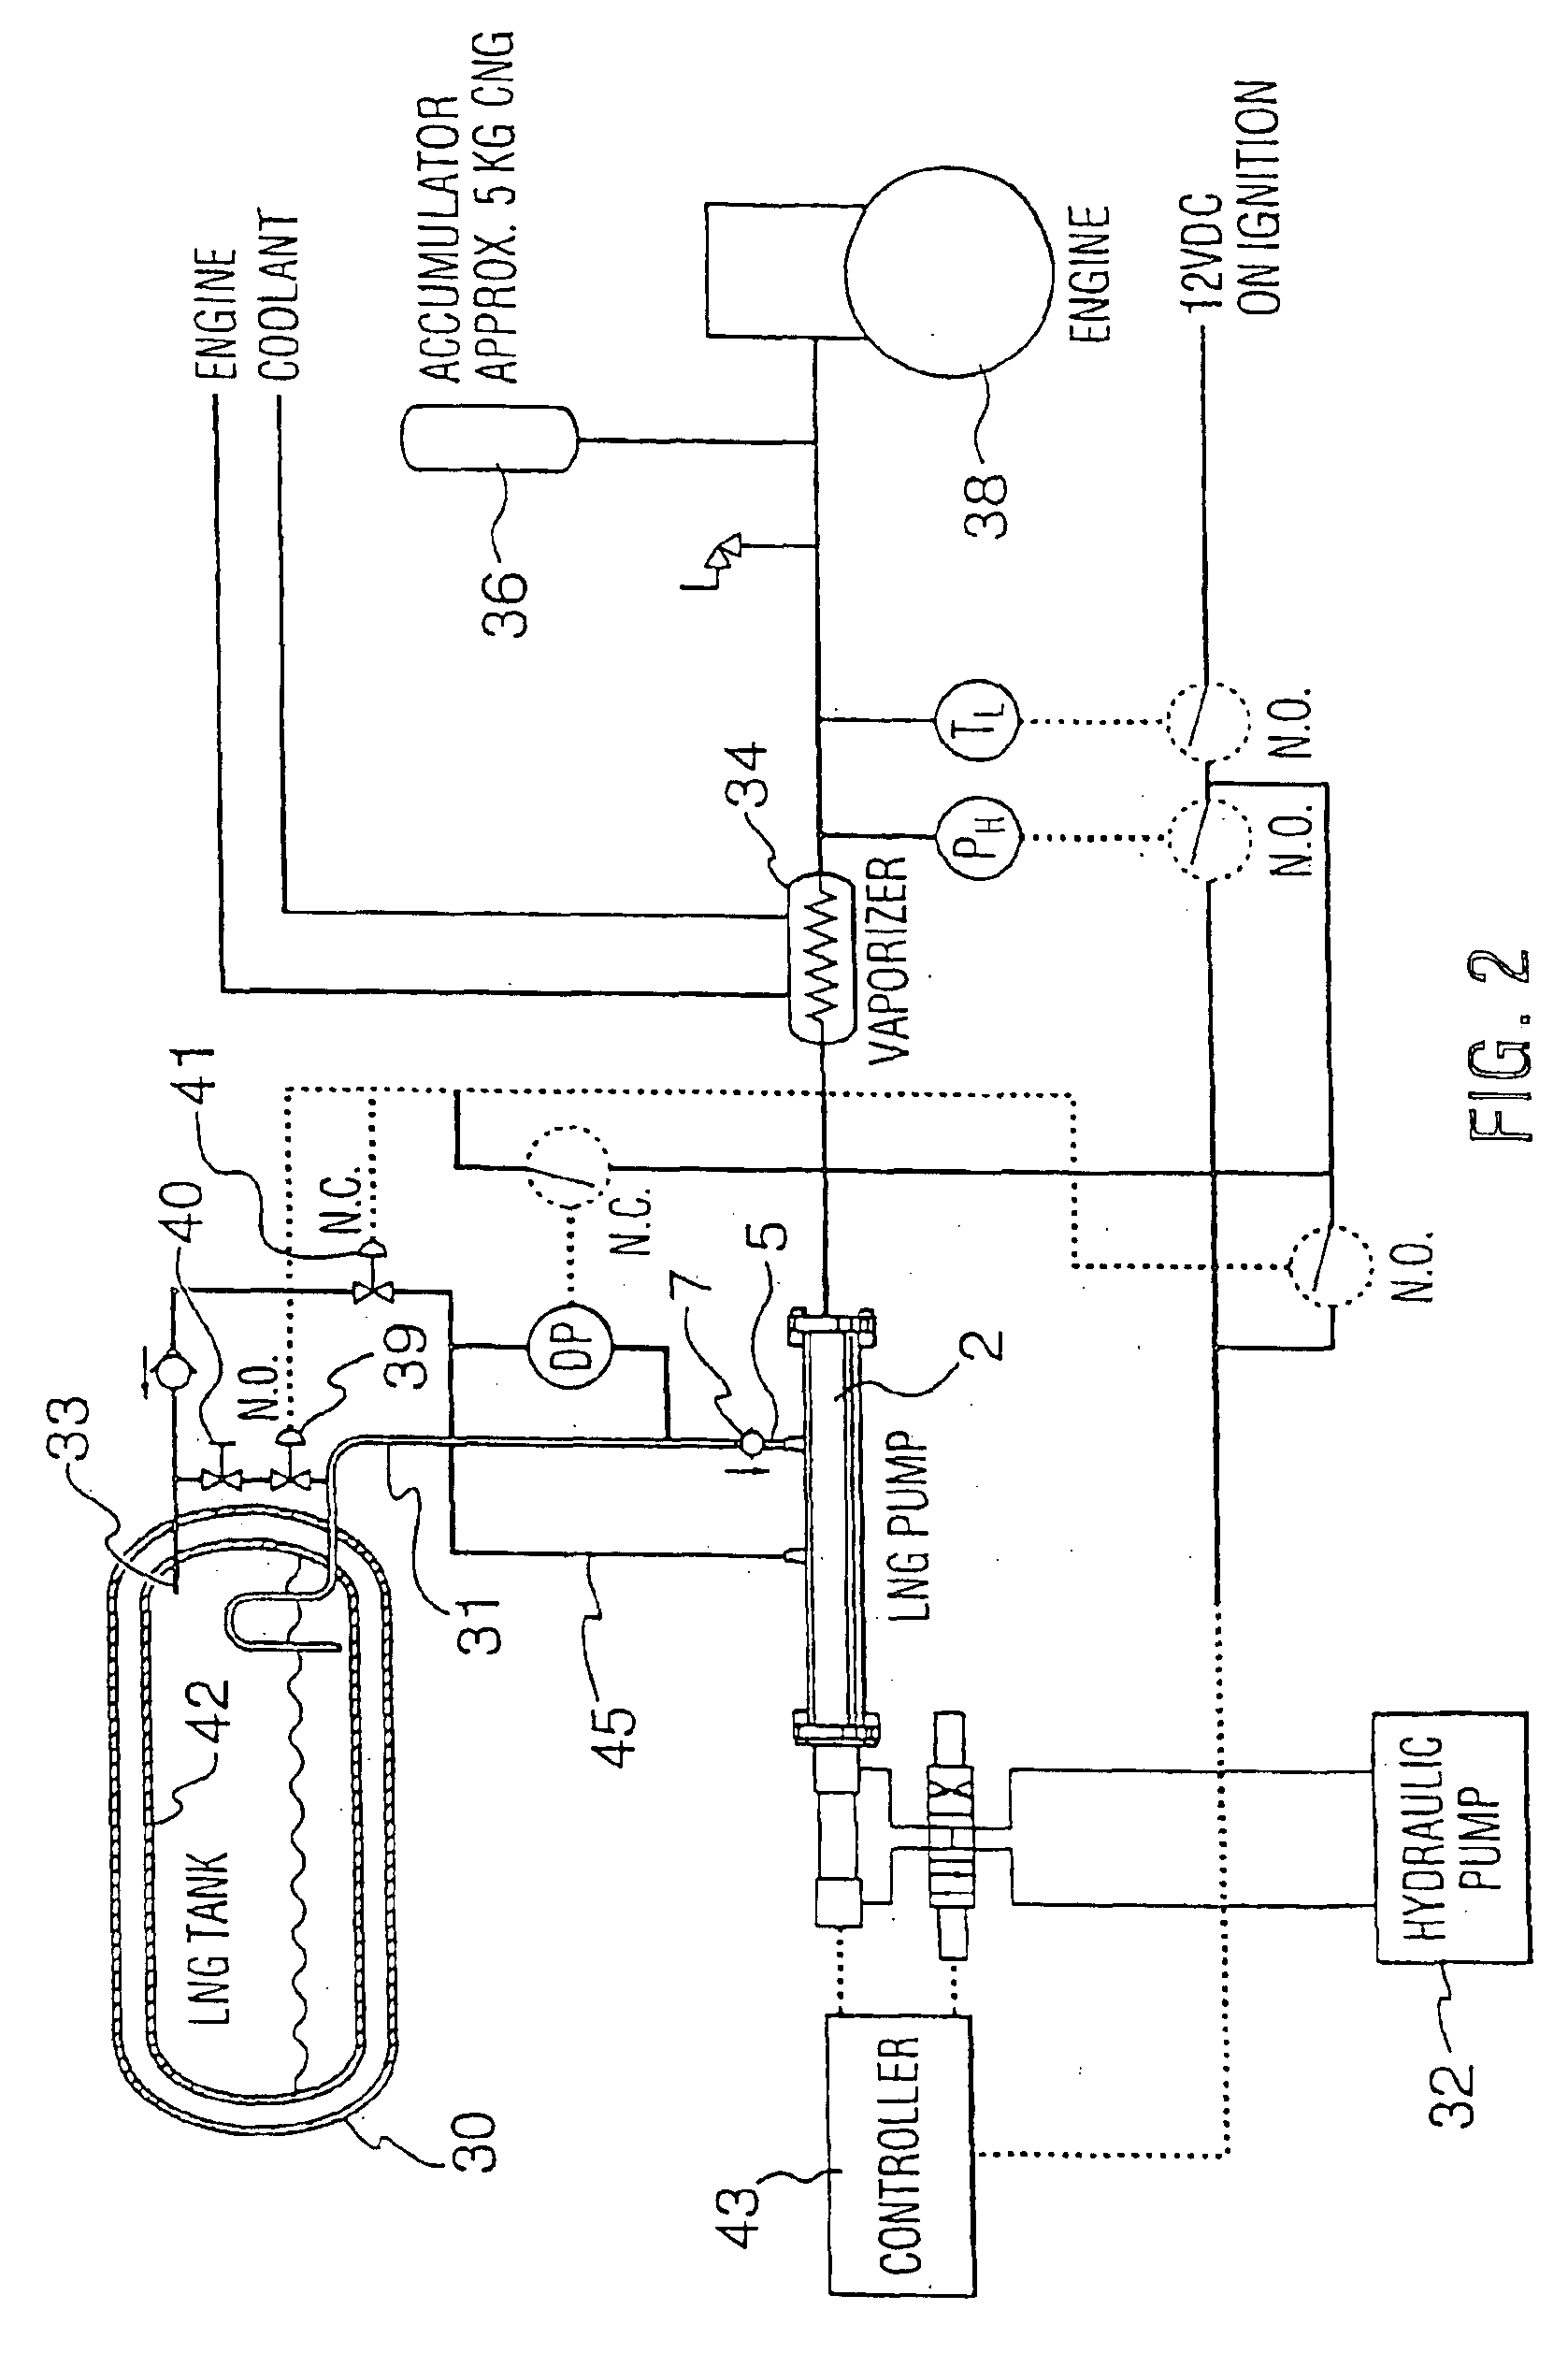 High pressure pump system for supplying a cryogenic fluid from a storage tank